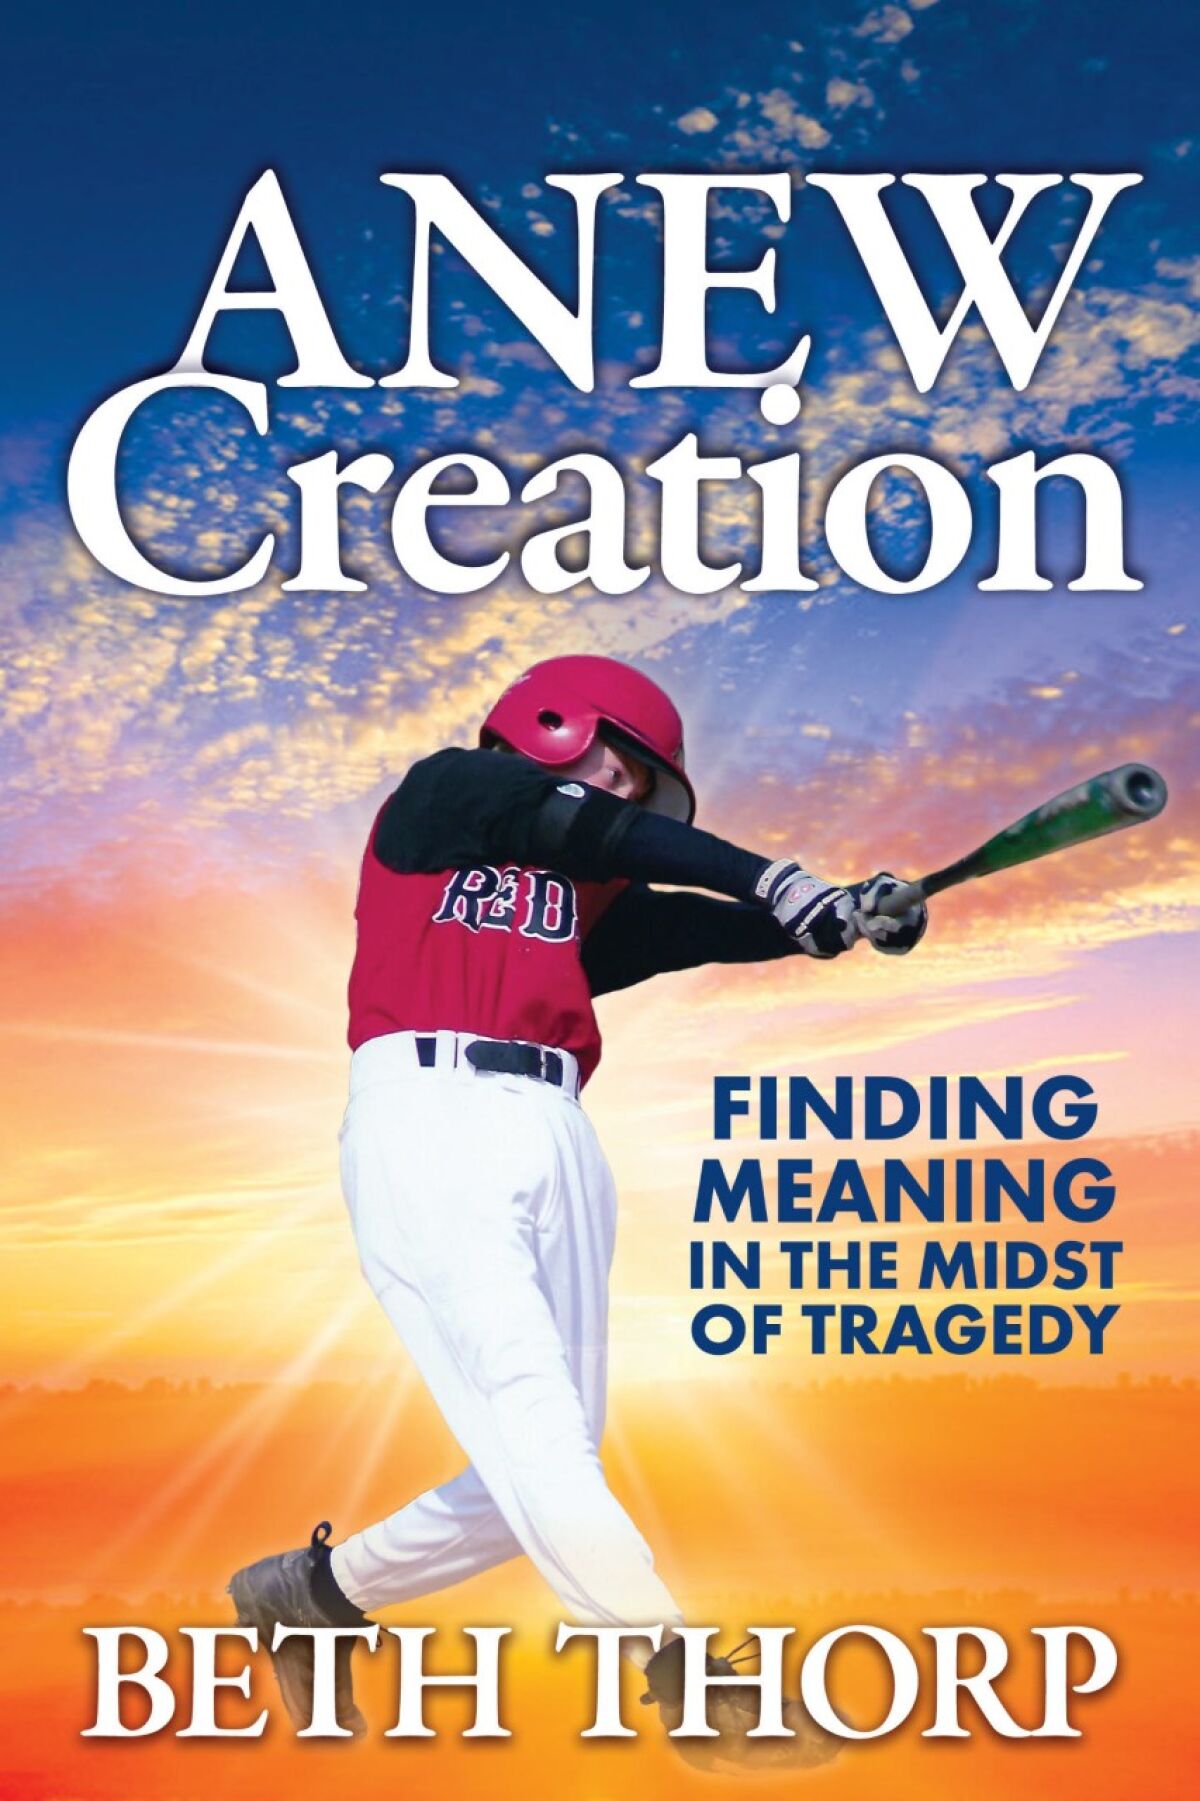 The cover of “ANEW Creation”